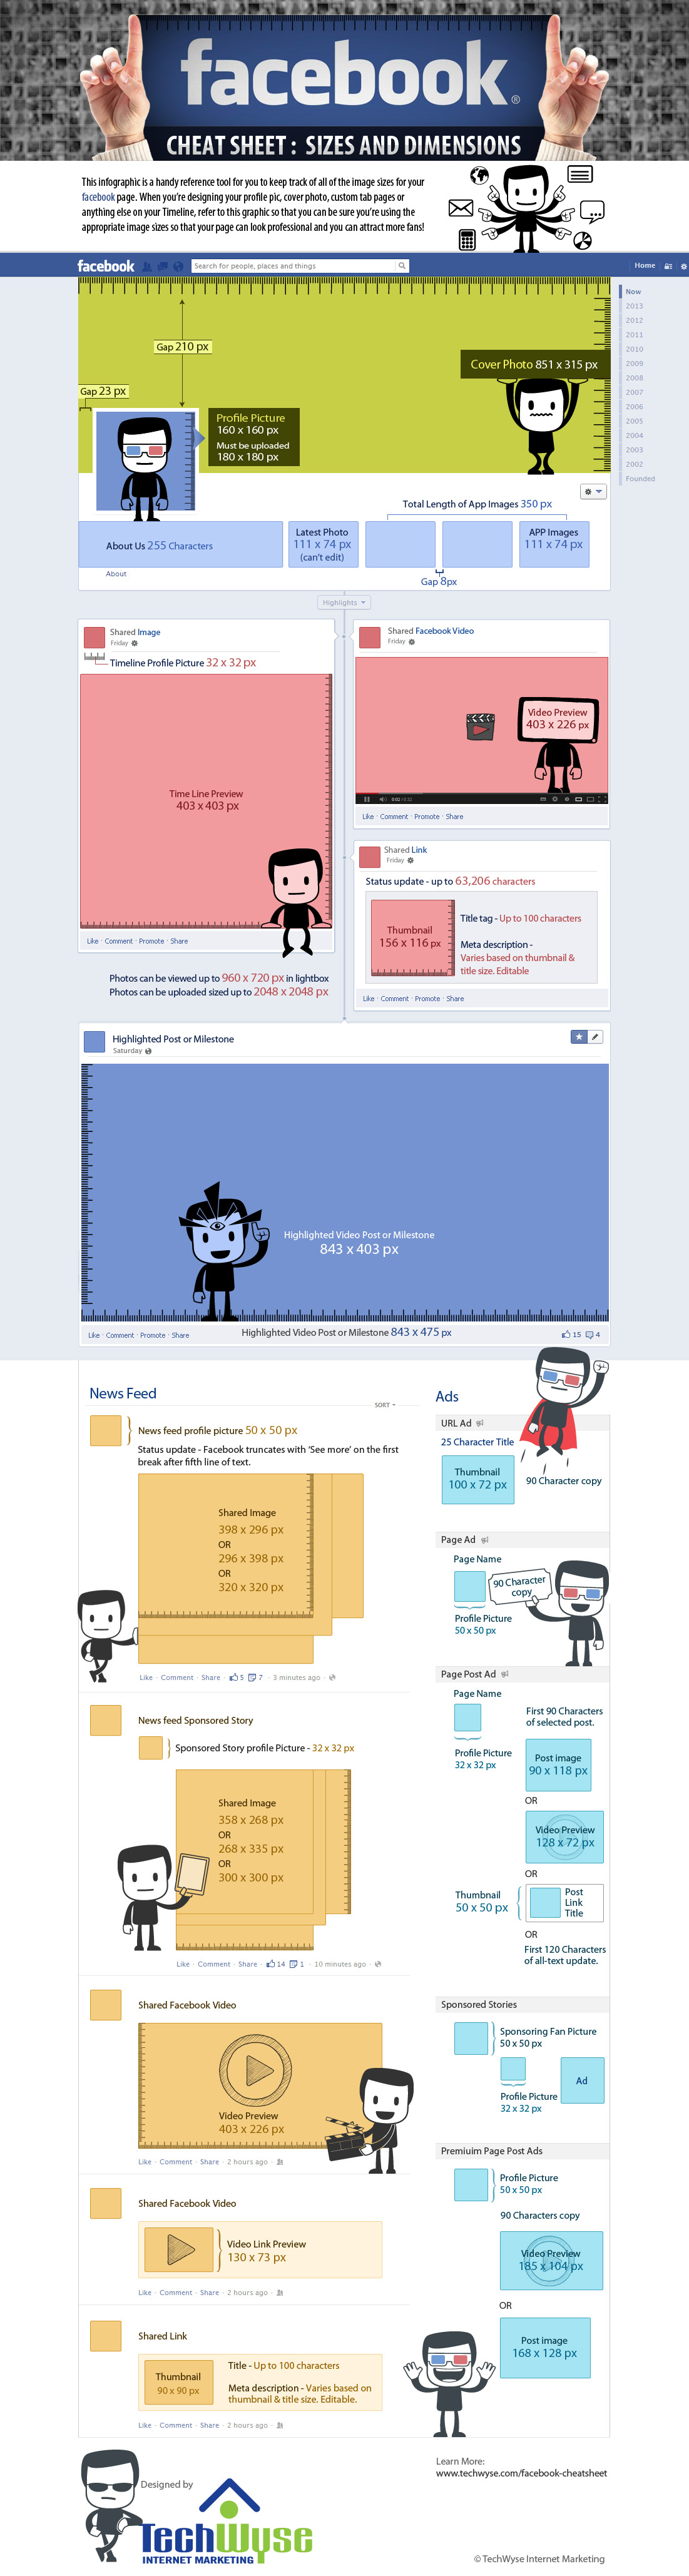 Facebook Cheat Sheet: Image Size and Dimensions